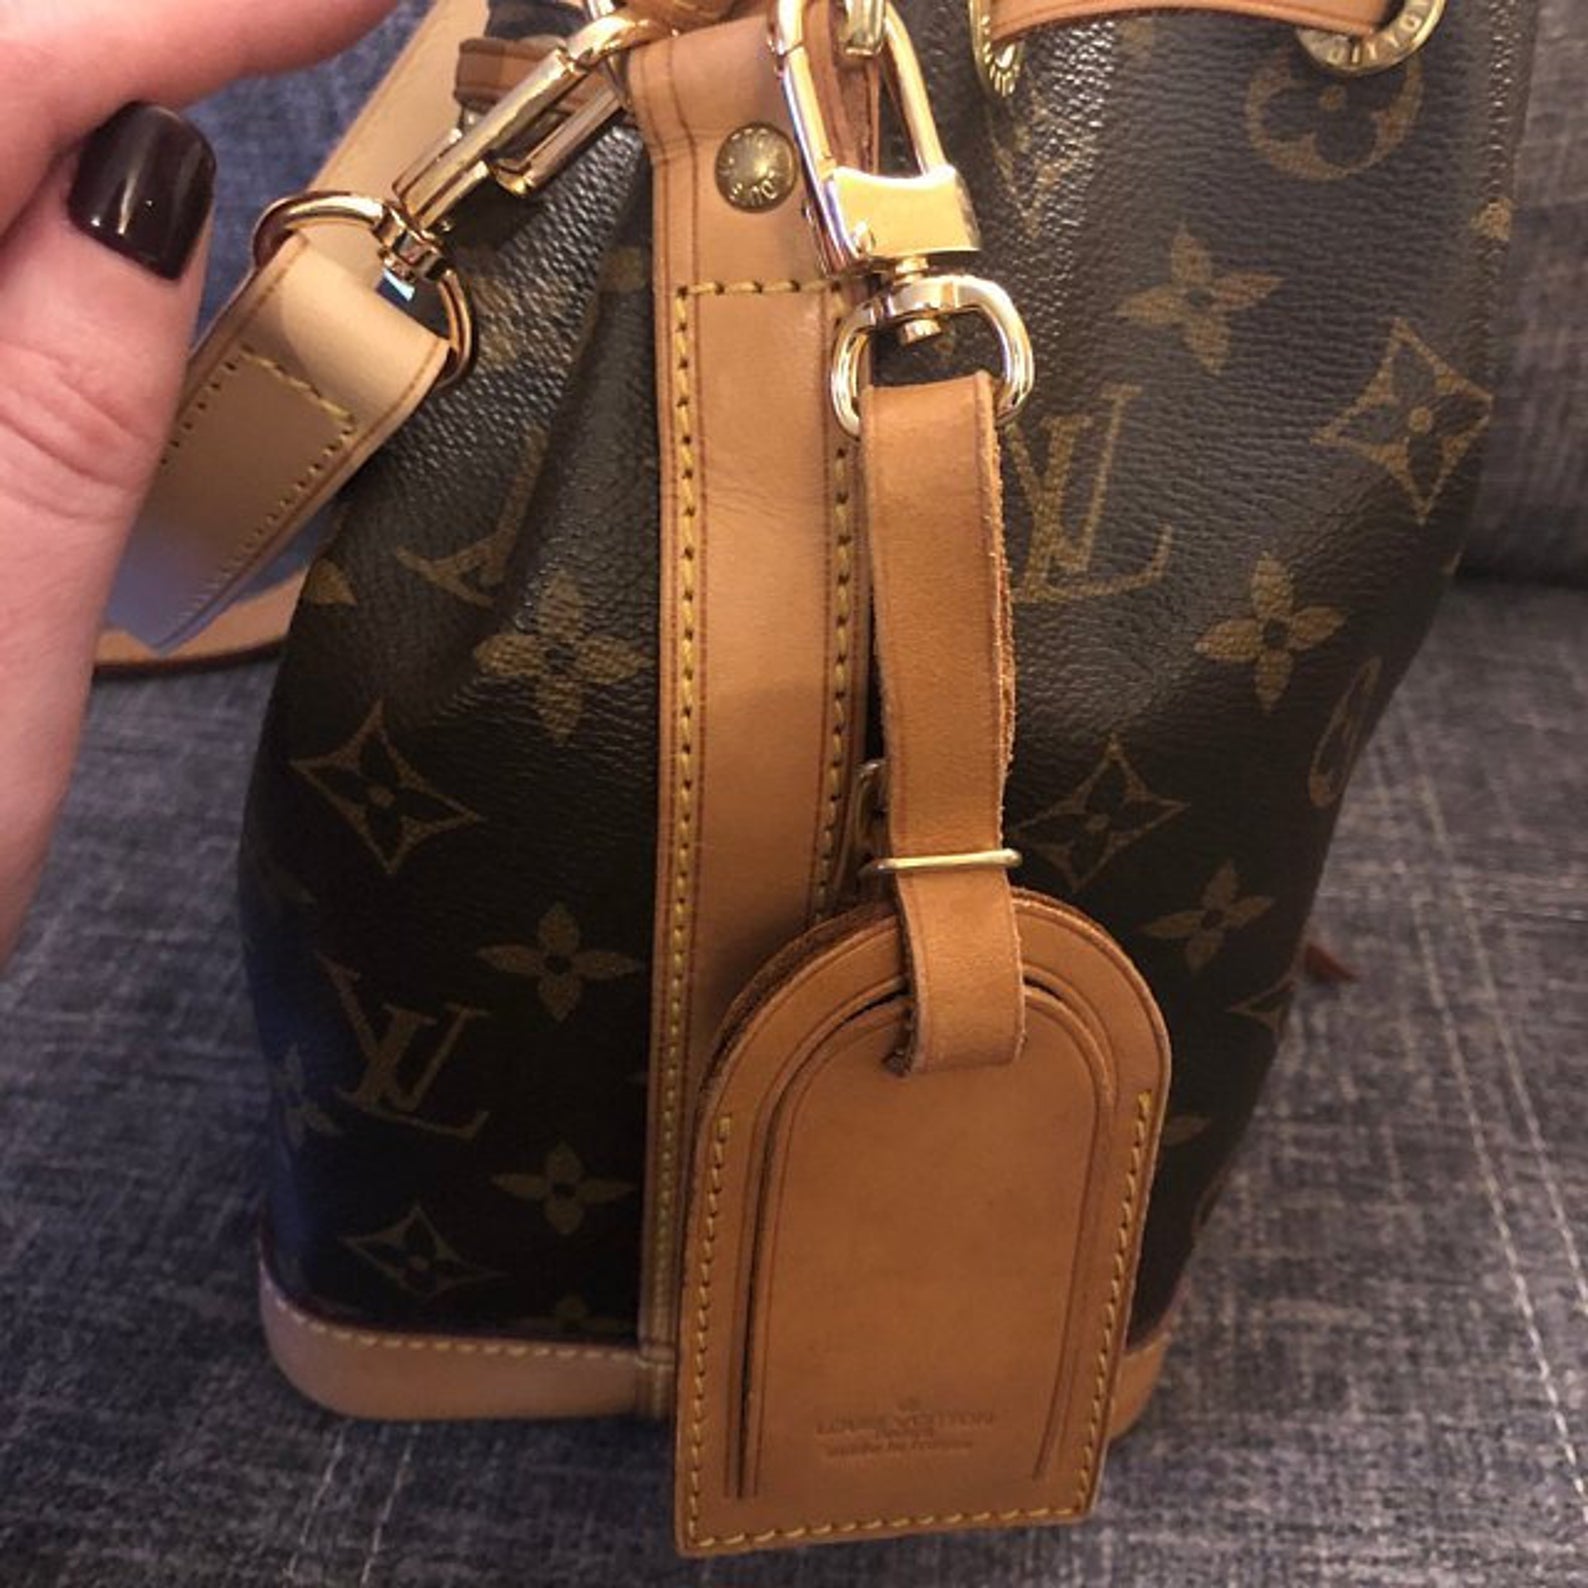 How to Tie a Louis Vuitton Luggage Tag